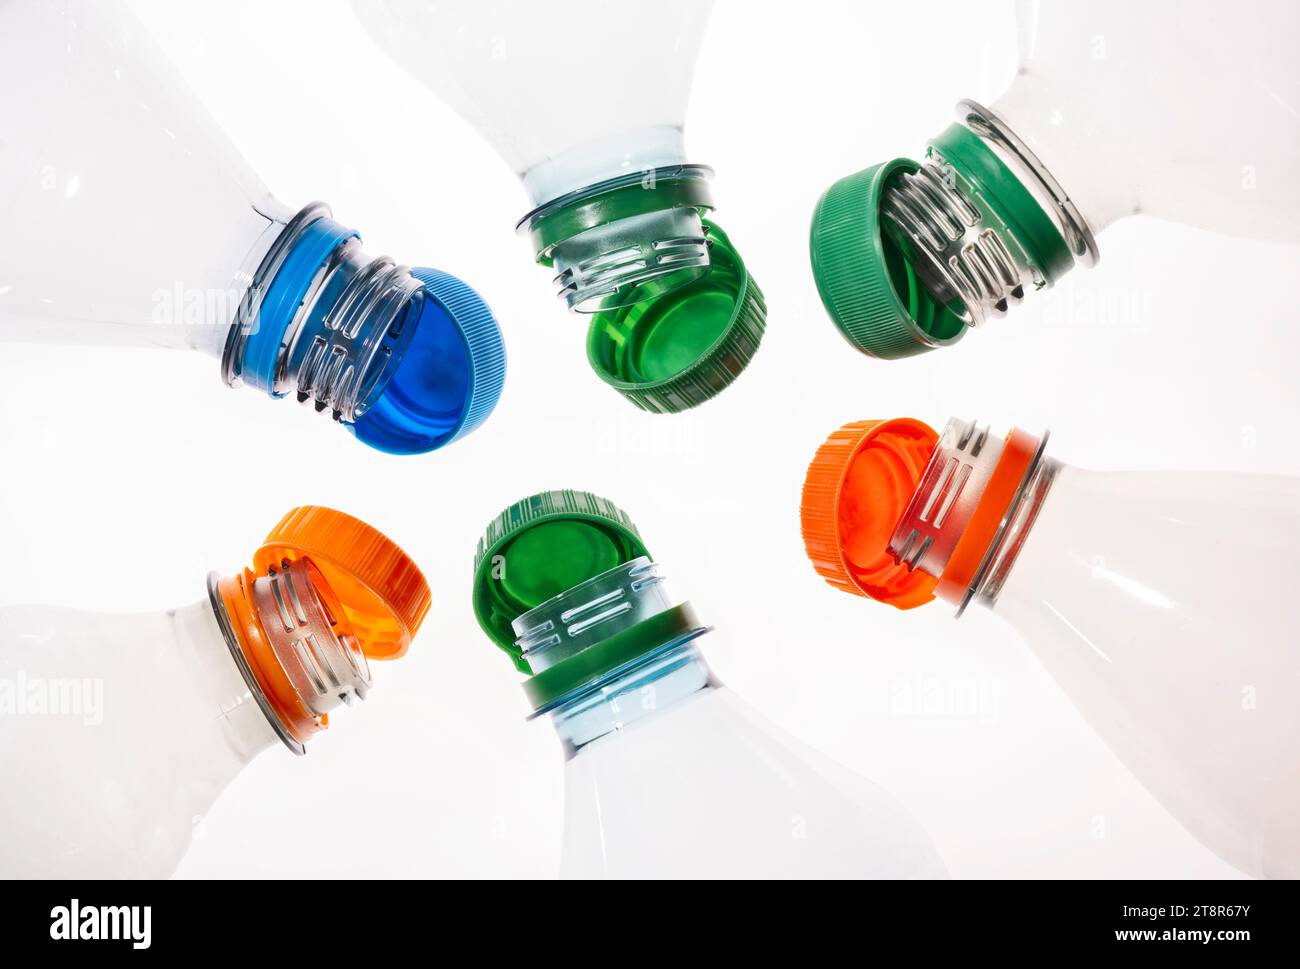 Plastic bottles with tethered caps in different colors Stock Photo